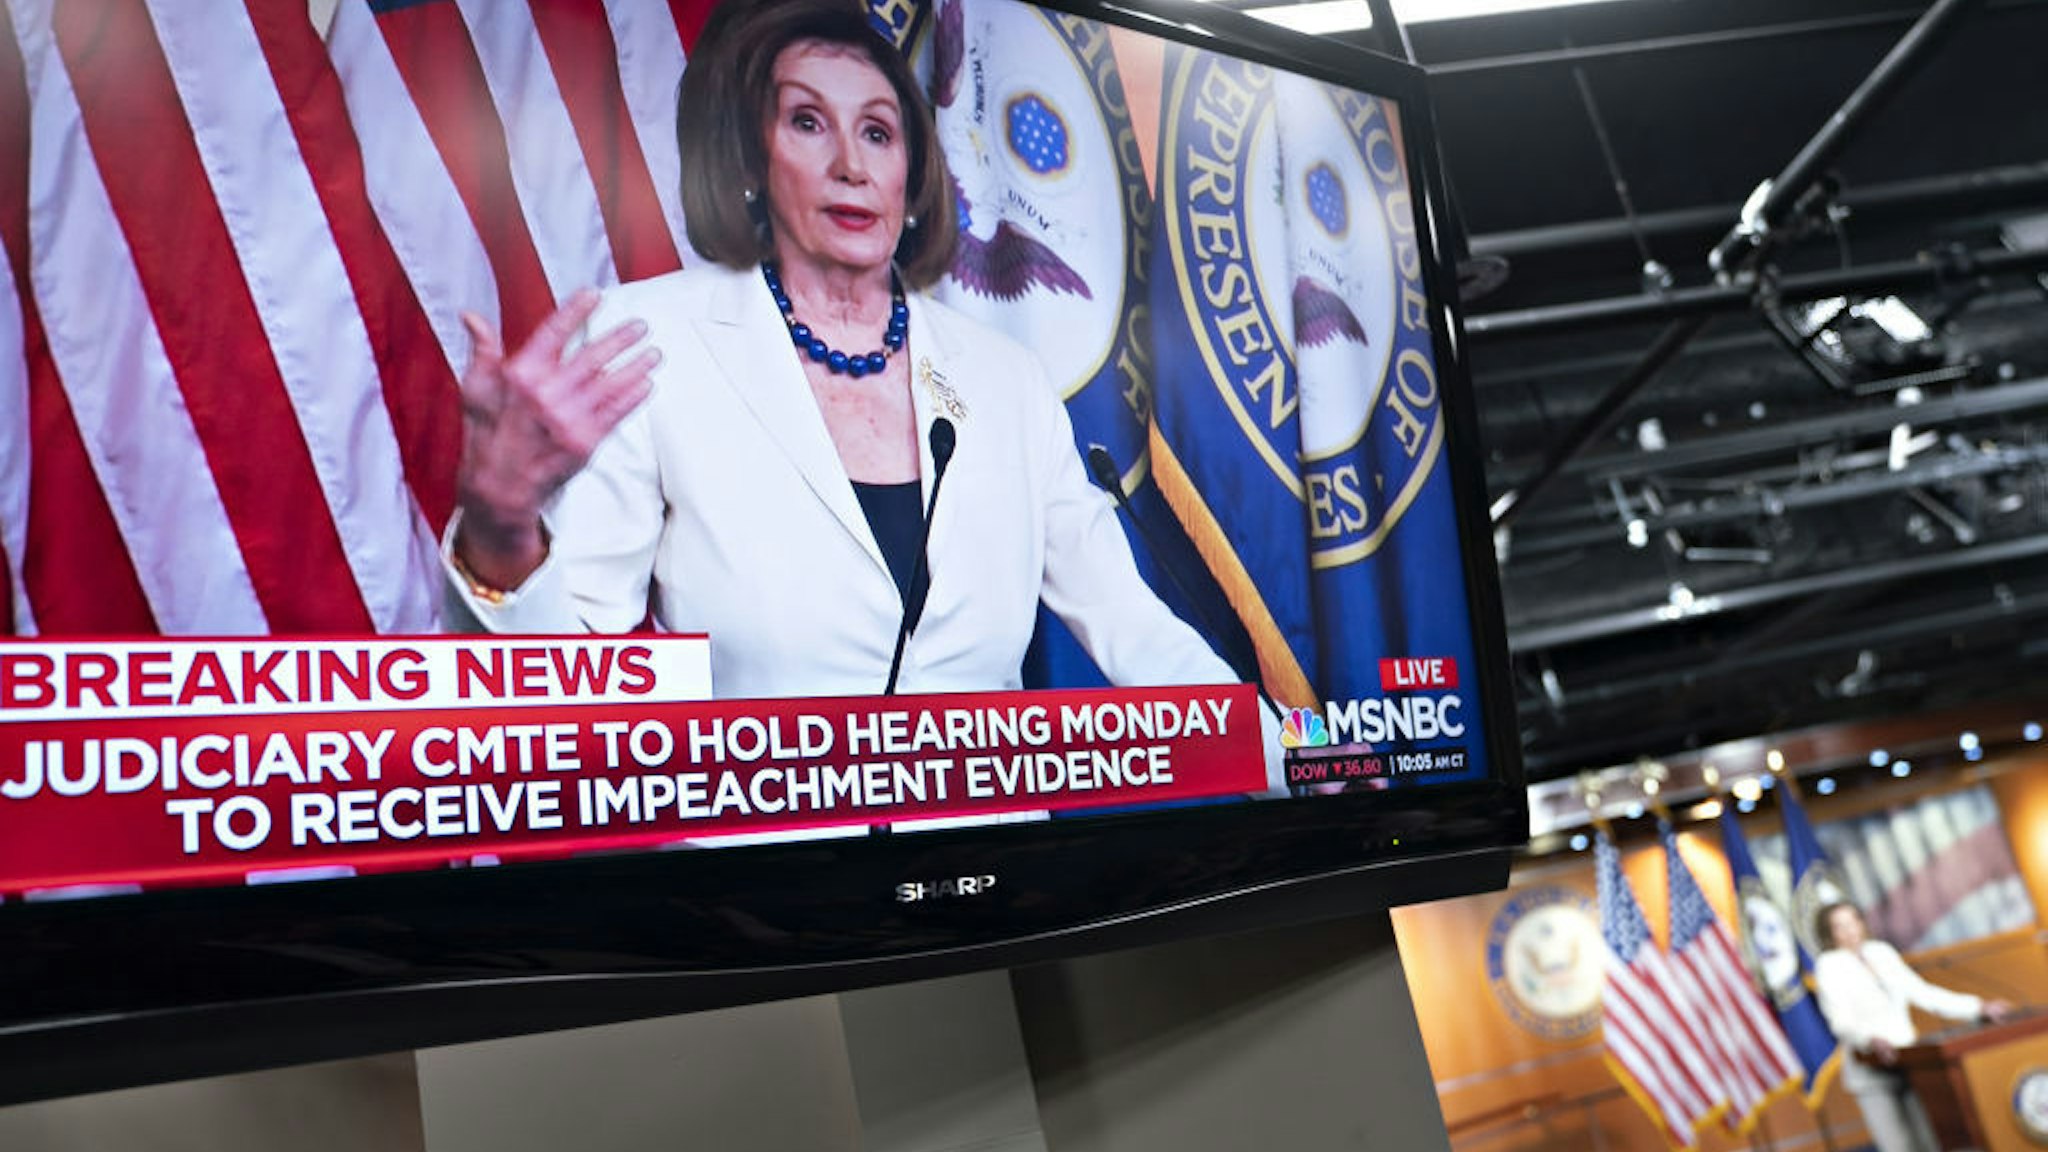 U.S. House Speaker Nancy Pelosi, a Democrat from California, is seen speaking on a television during a news conference on Capitol Hill in Washington, D.C., U.S., on Thursday, Dec. 5, 2019. Pelosi said today that President Donald Trump's actions are a "profound violation of the public trust" and she is asking Representative Jerry Nadler to proceed with drafting articles of impeachment. Photographer: Andrew Harrer/Bloomberg